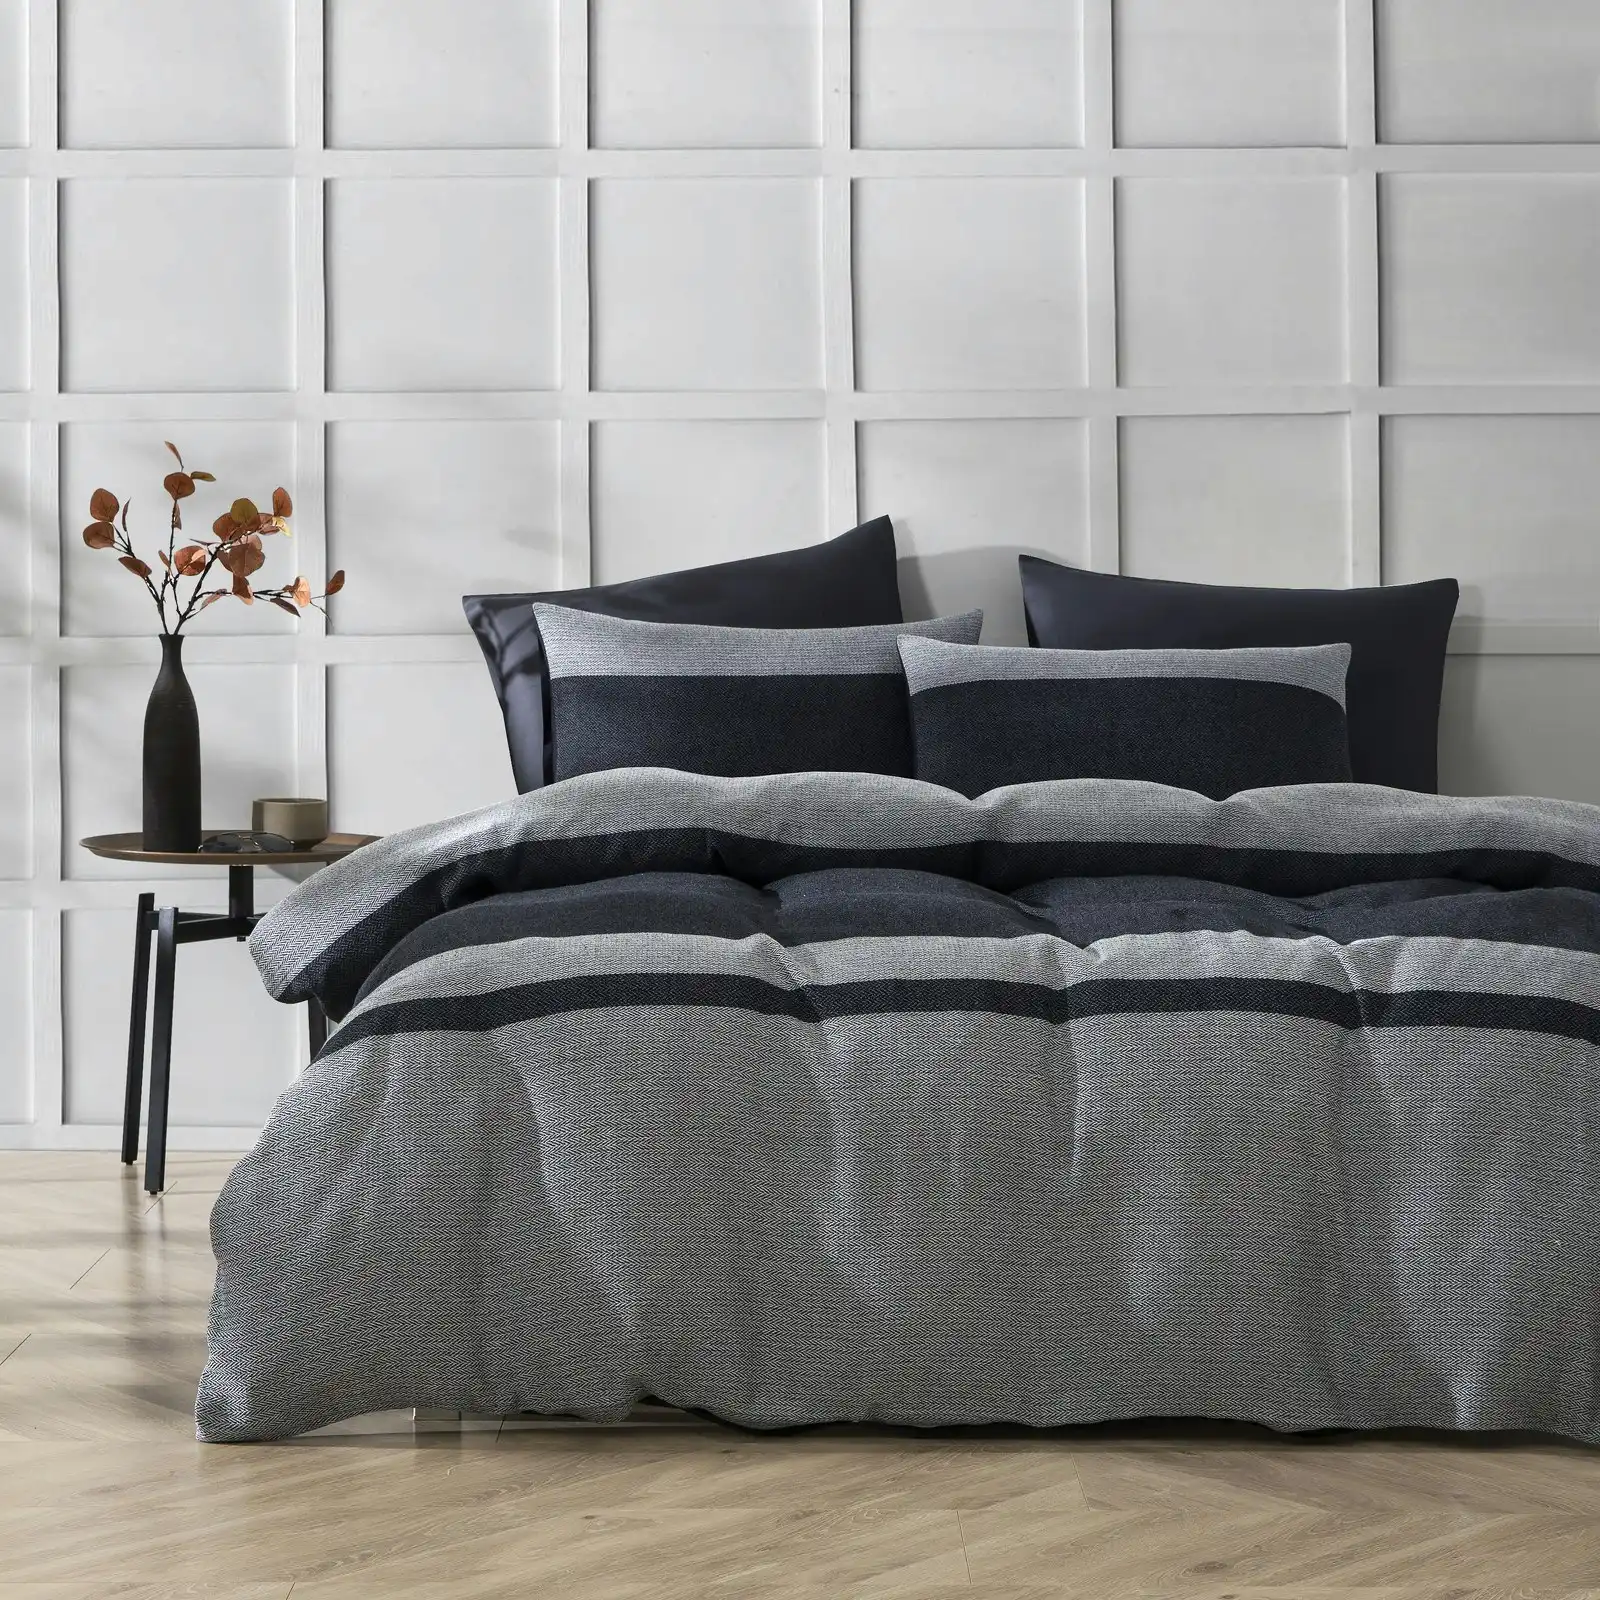 Dreamaker Herringbone 100% Cotton Quilt Cover Set Charcoal King Bed